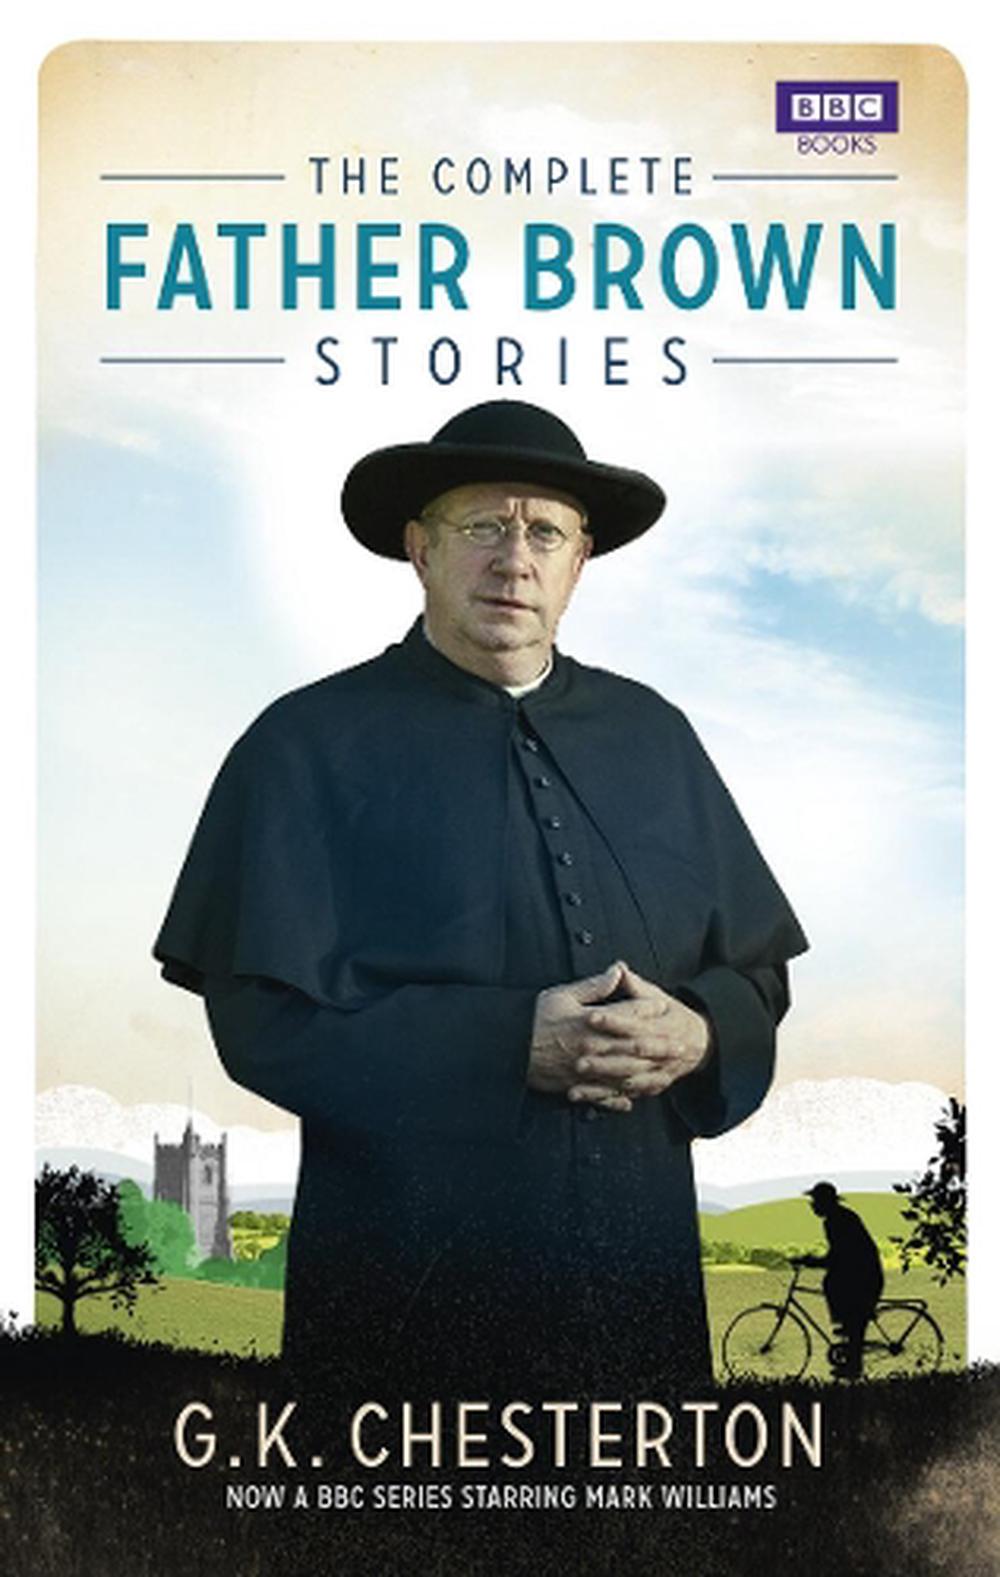 Complete Father Brown Stories by G Chesterton, Paperback, 9781849906463 |  Buy online at The Nile